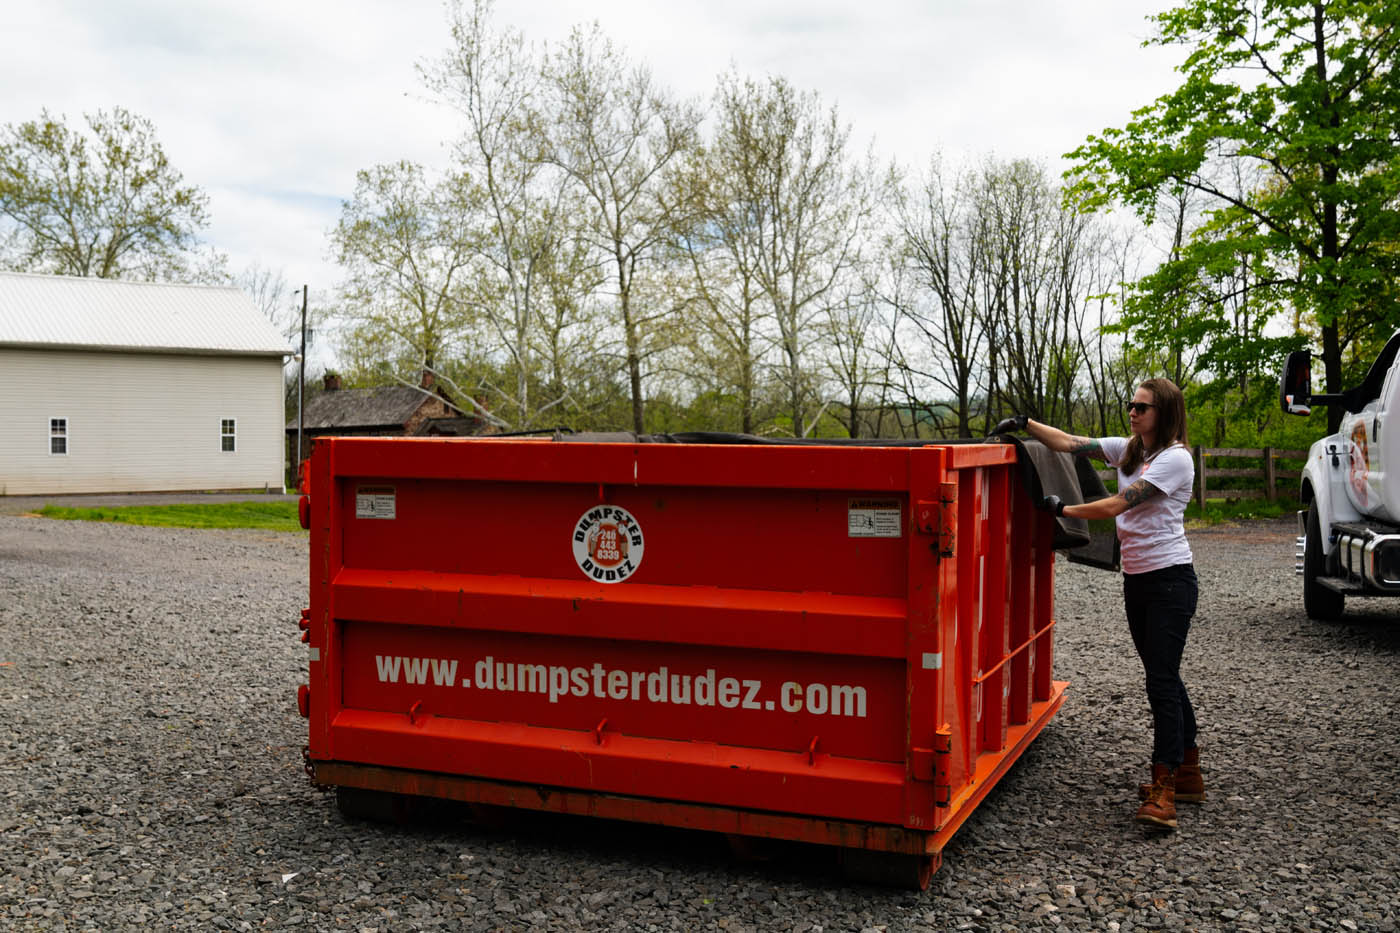 Dumpster Dudez driver disposing waste in one of our dumpsters - contact us for reliable and hassle free services.